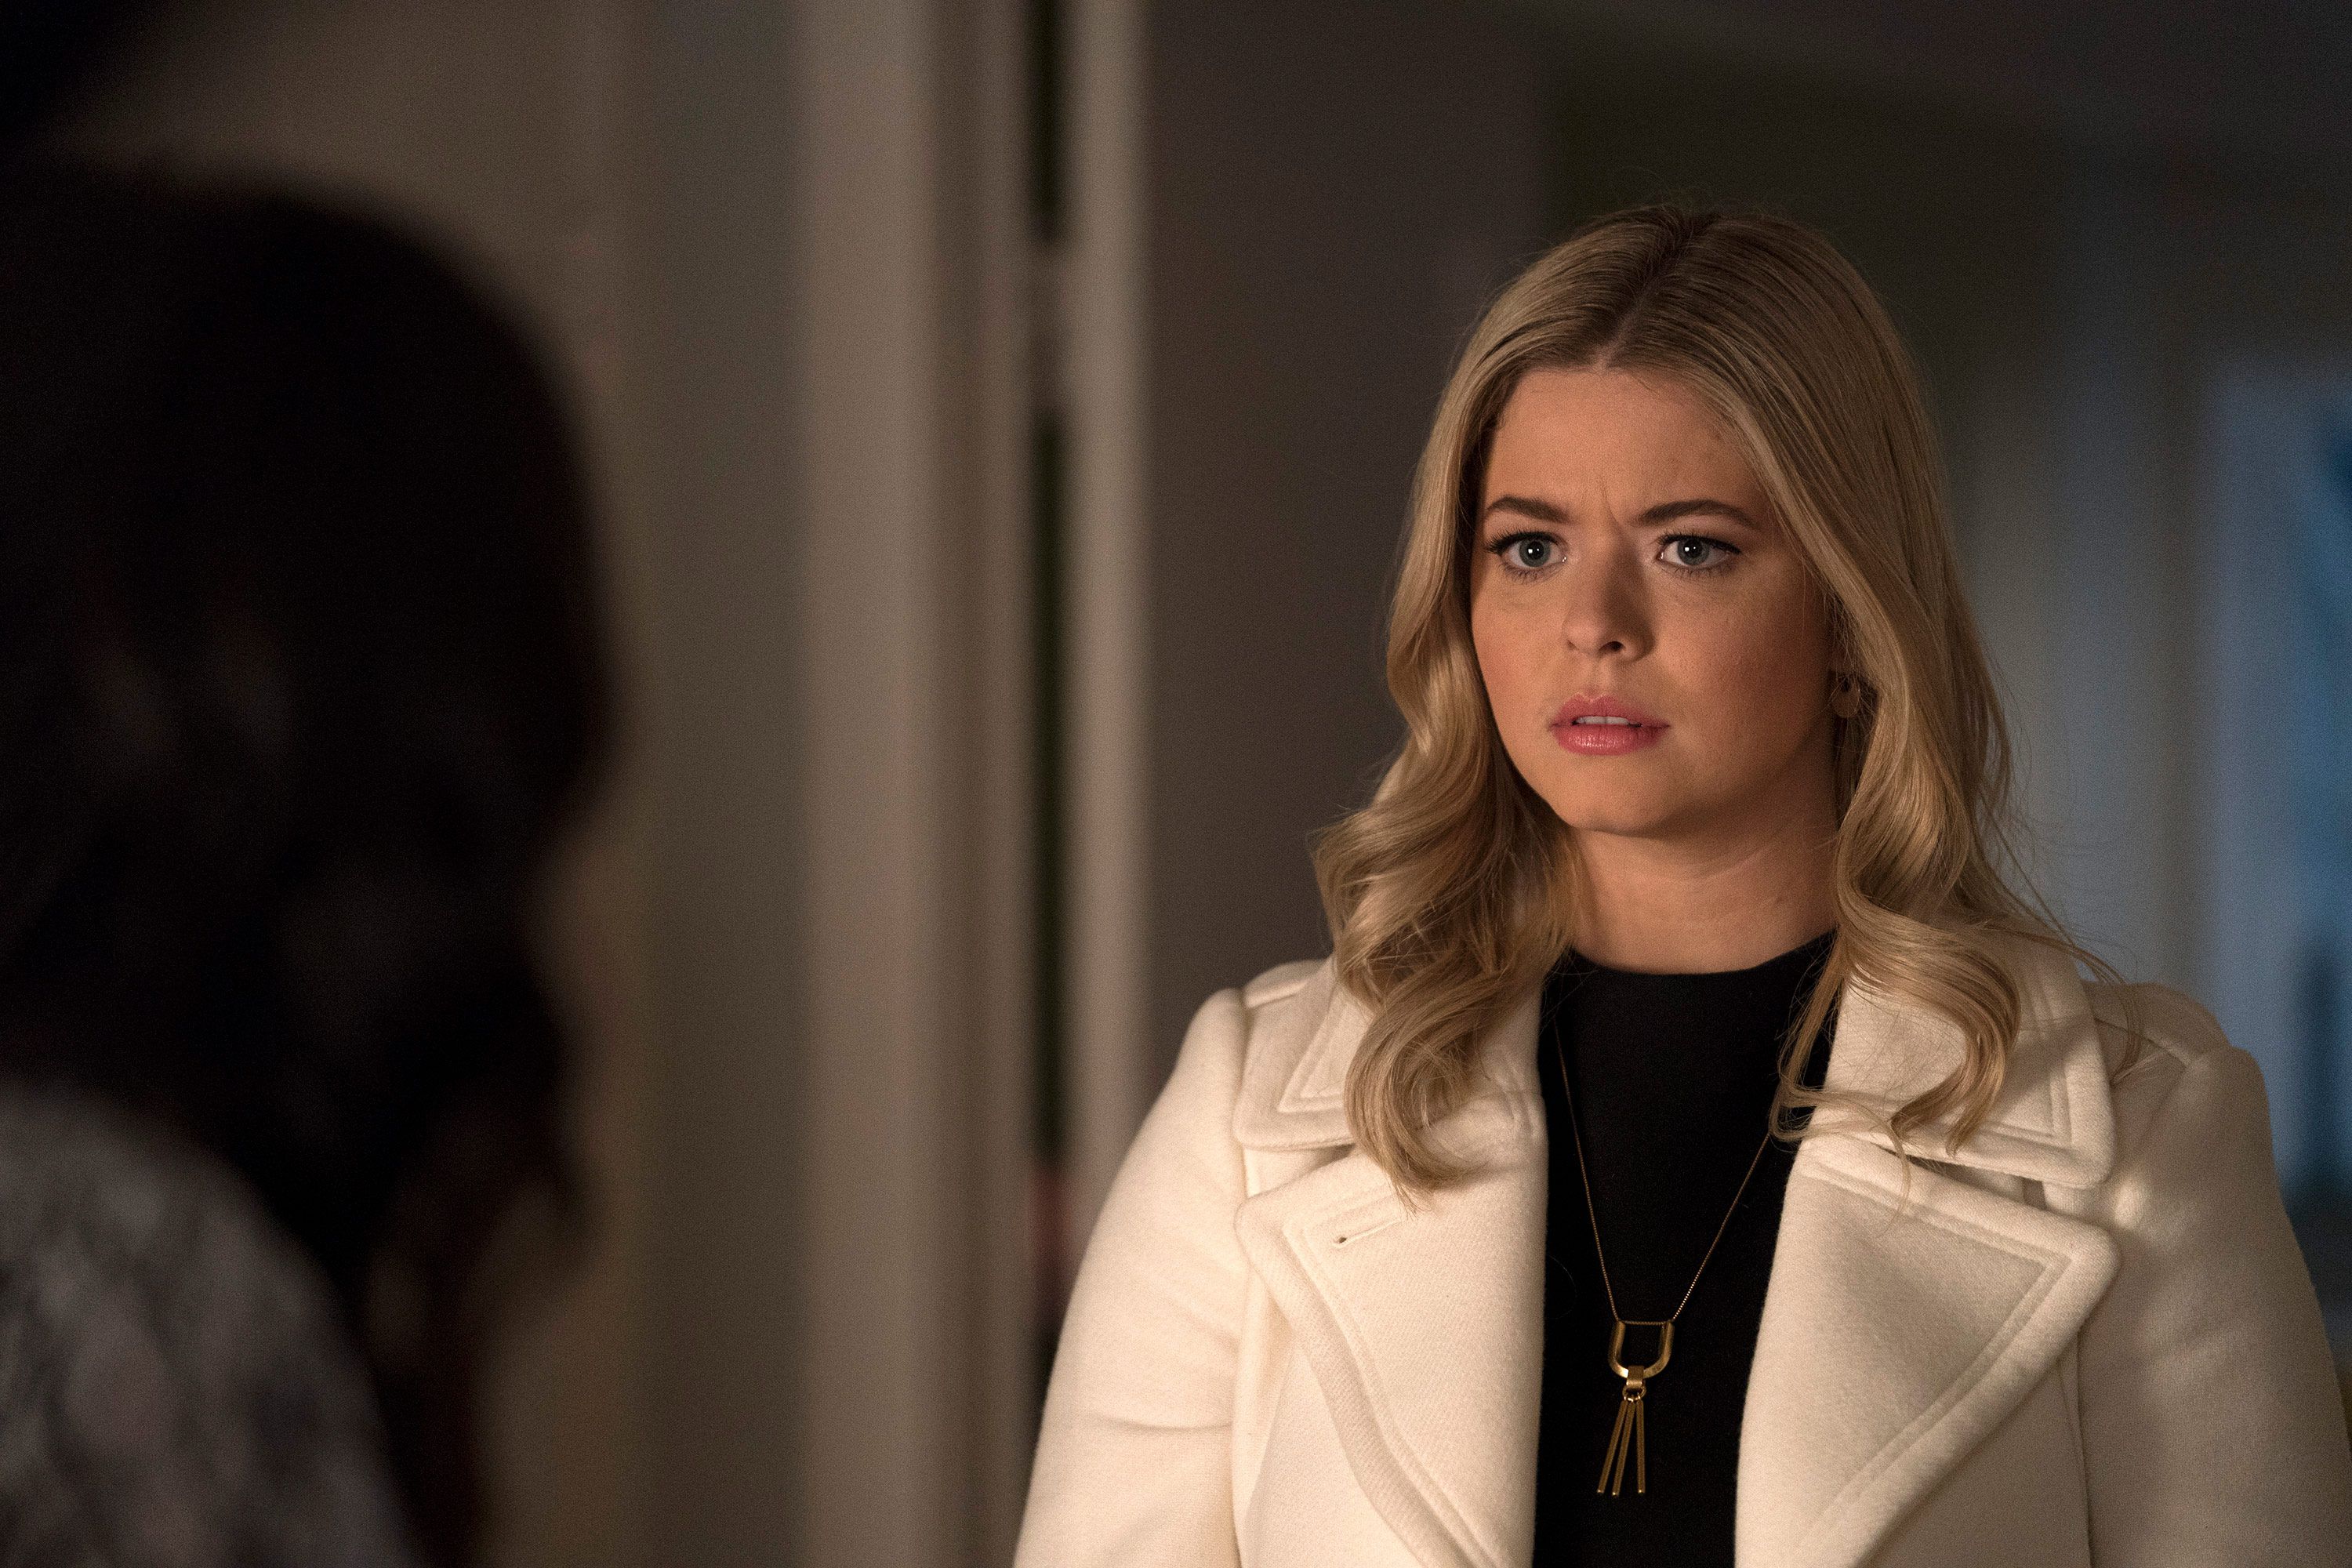 Here's why Pretty Little Liars' Emily doesn't appear with Alison